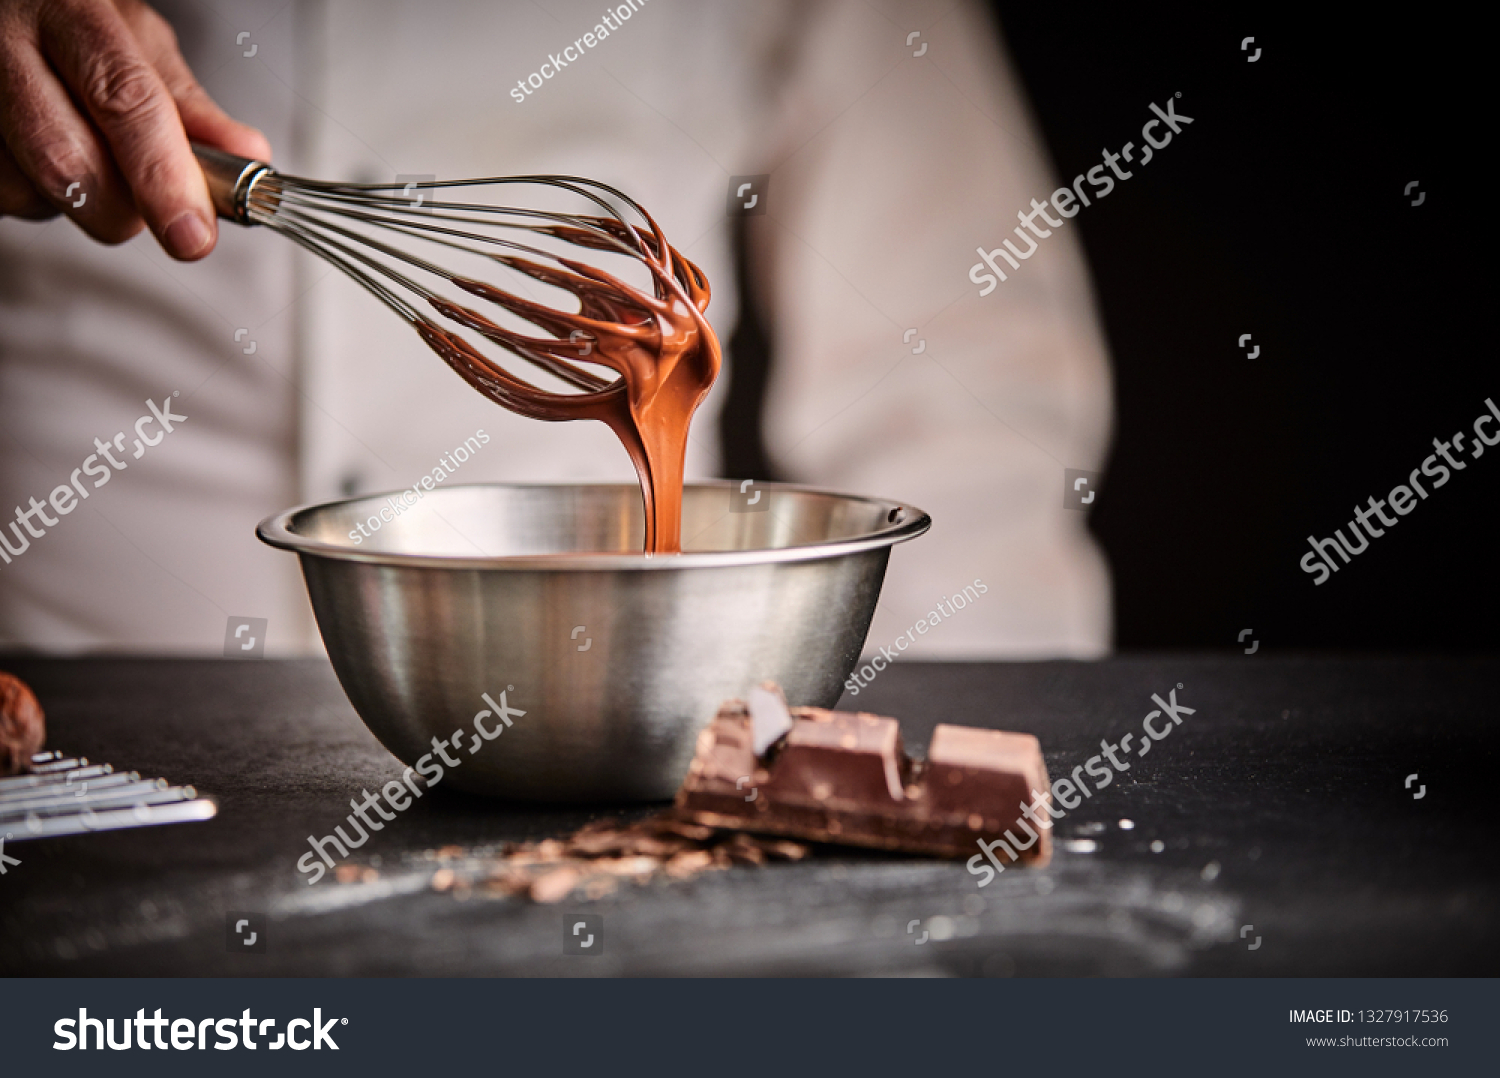 Chef whisking melted chocolate in a stainless steel mixing bowl using an old vintage wire whisk in a close up on his hand #1327917536